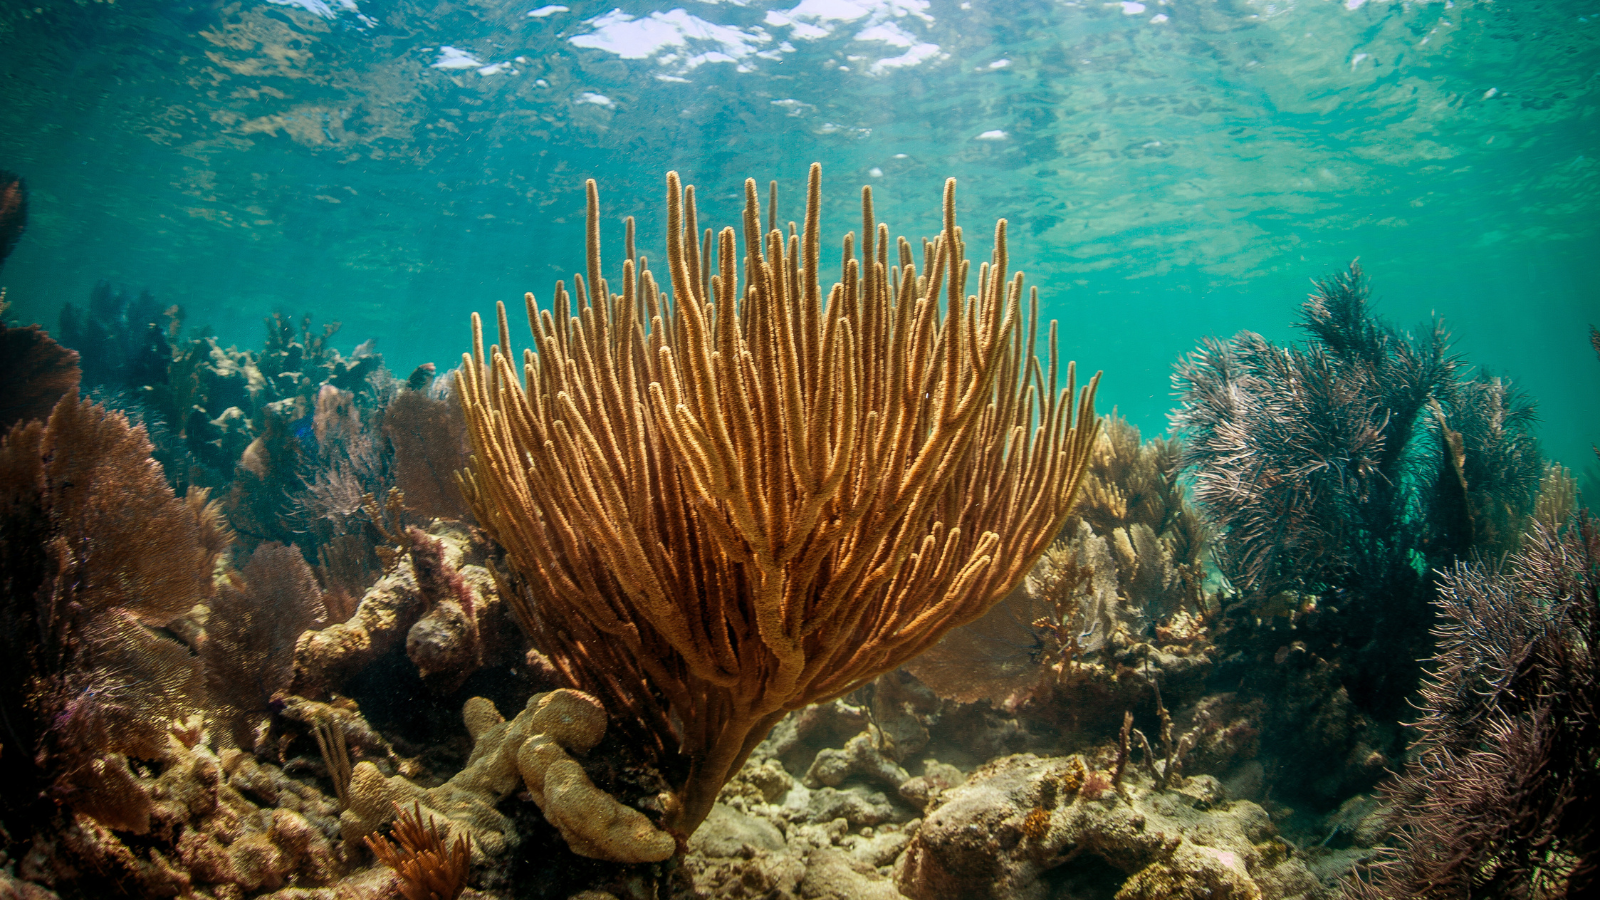 Coral in the Florida Keys NMS